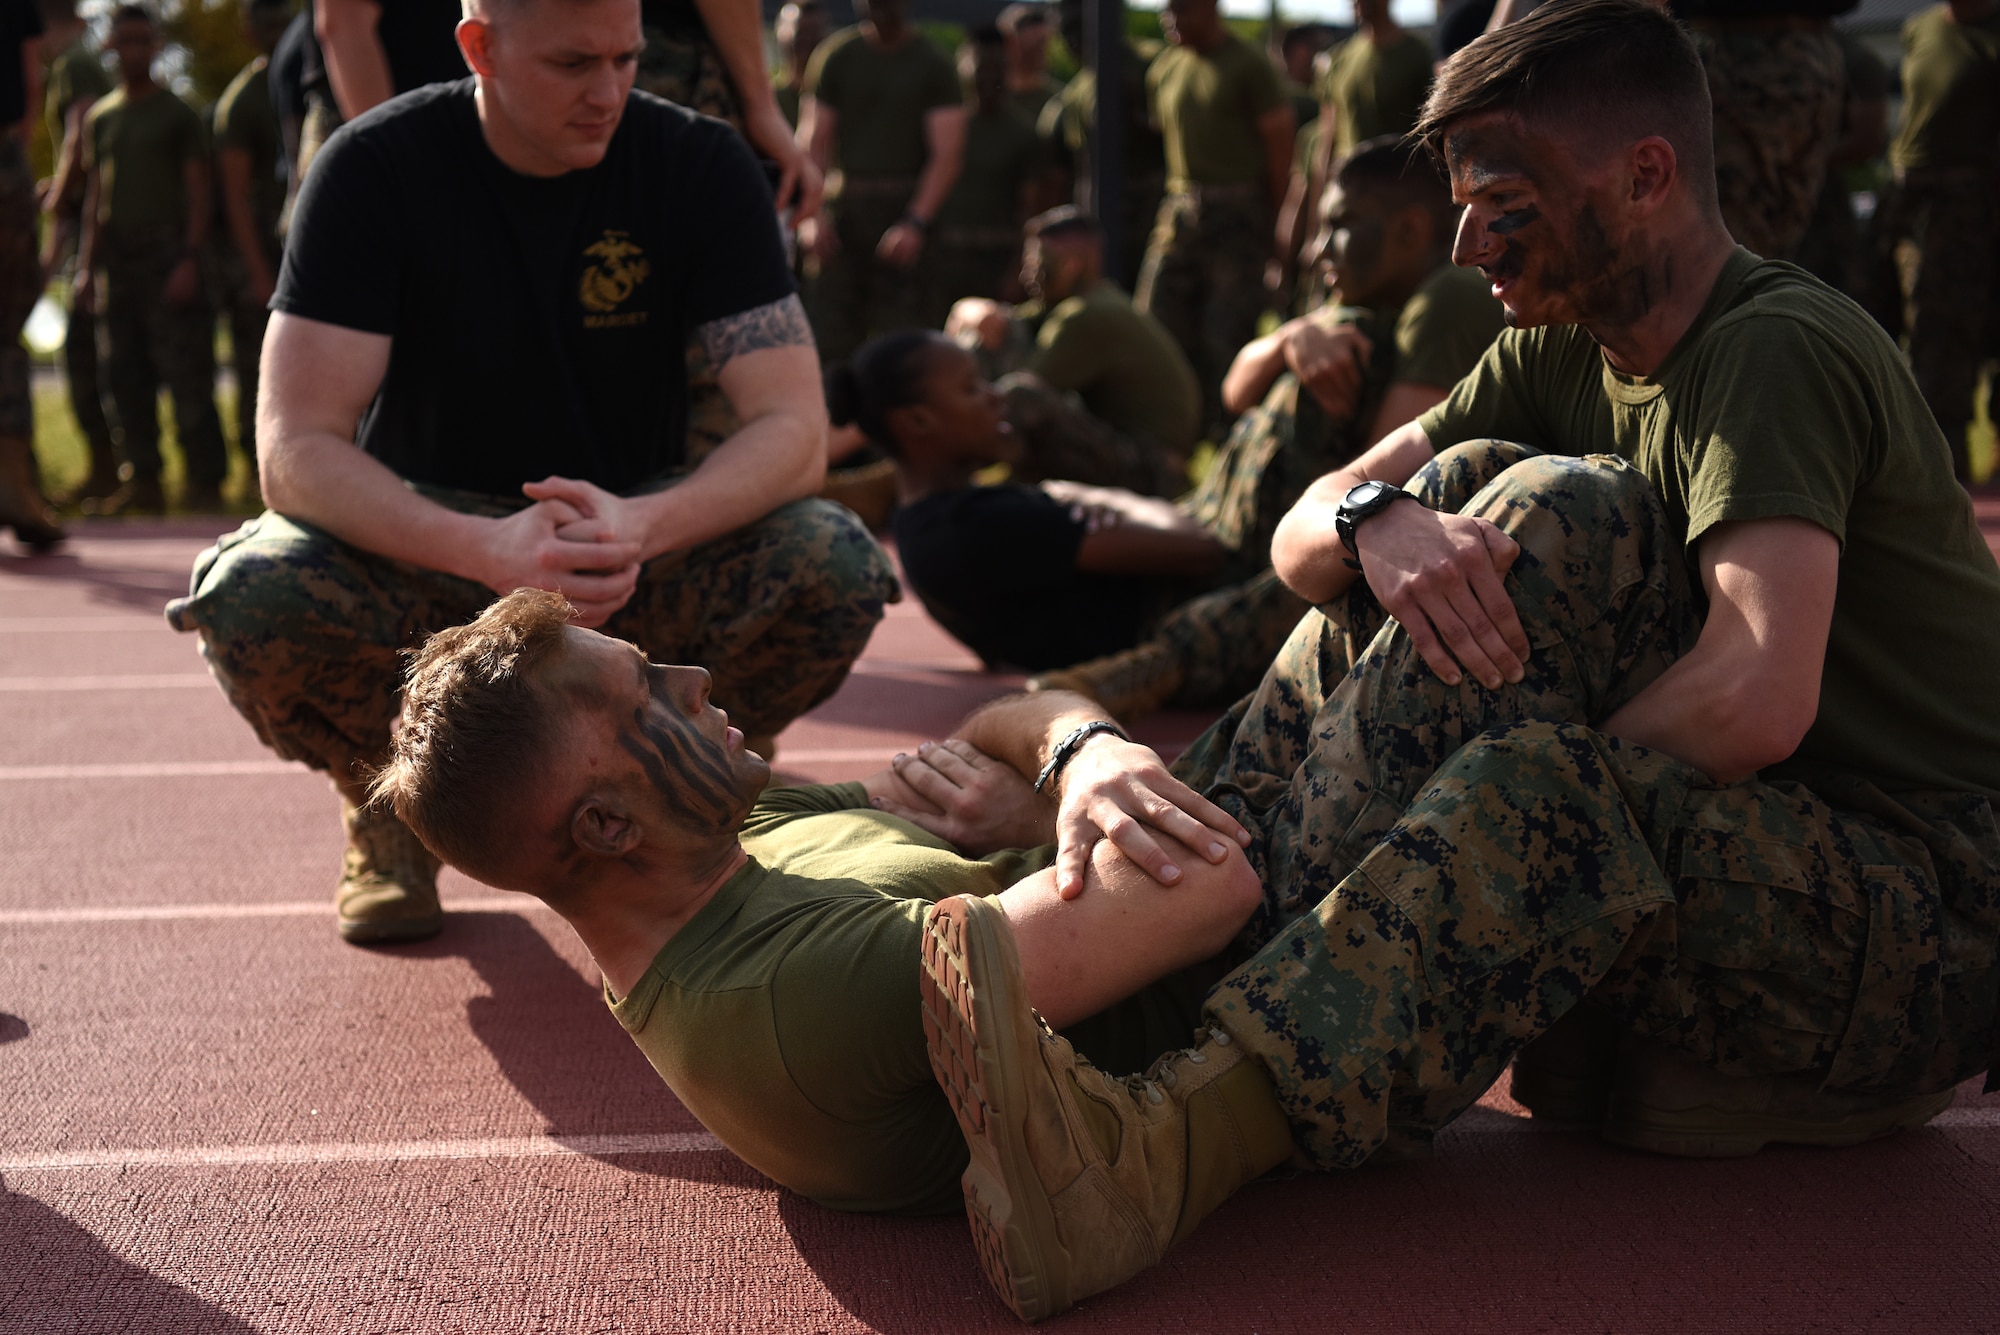 Keesler Marine Detachment students do crunches for the hip race at the Triangle Track during the 2nd Annual Warrior Day at Keesler Air Force Base, Mississippi, April 6, 2018. The hip race included 50 ammo can lifts, 20 burpees, 50 squats, 50 crunches and five squad pushups. The event served to promote unit cohesion, camaraderie and small unit leadership. (U.S. Air Force photo by Airman 1st Class Suzie Plotnikov)